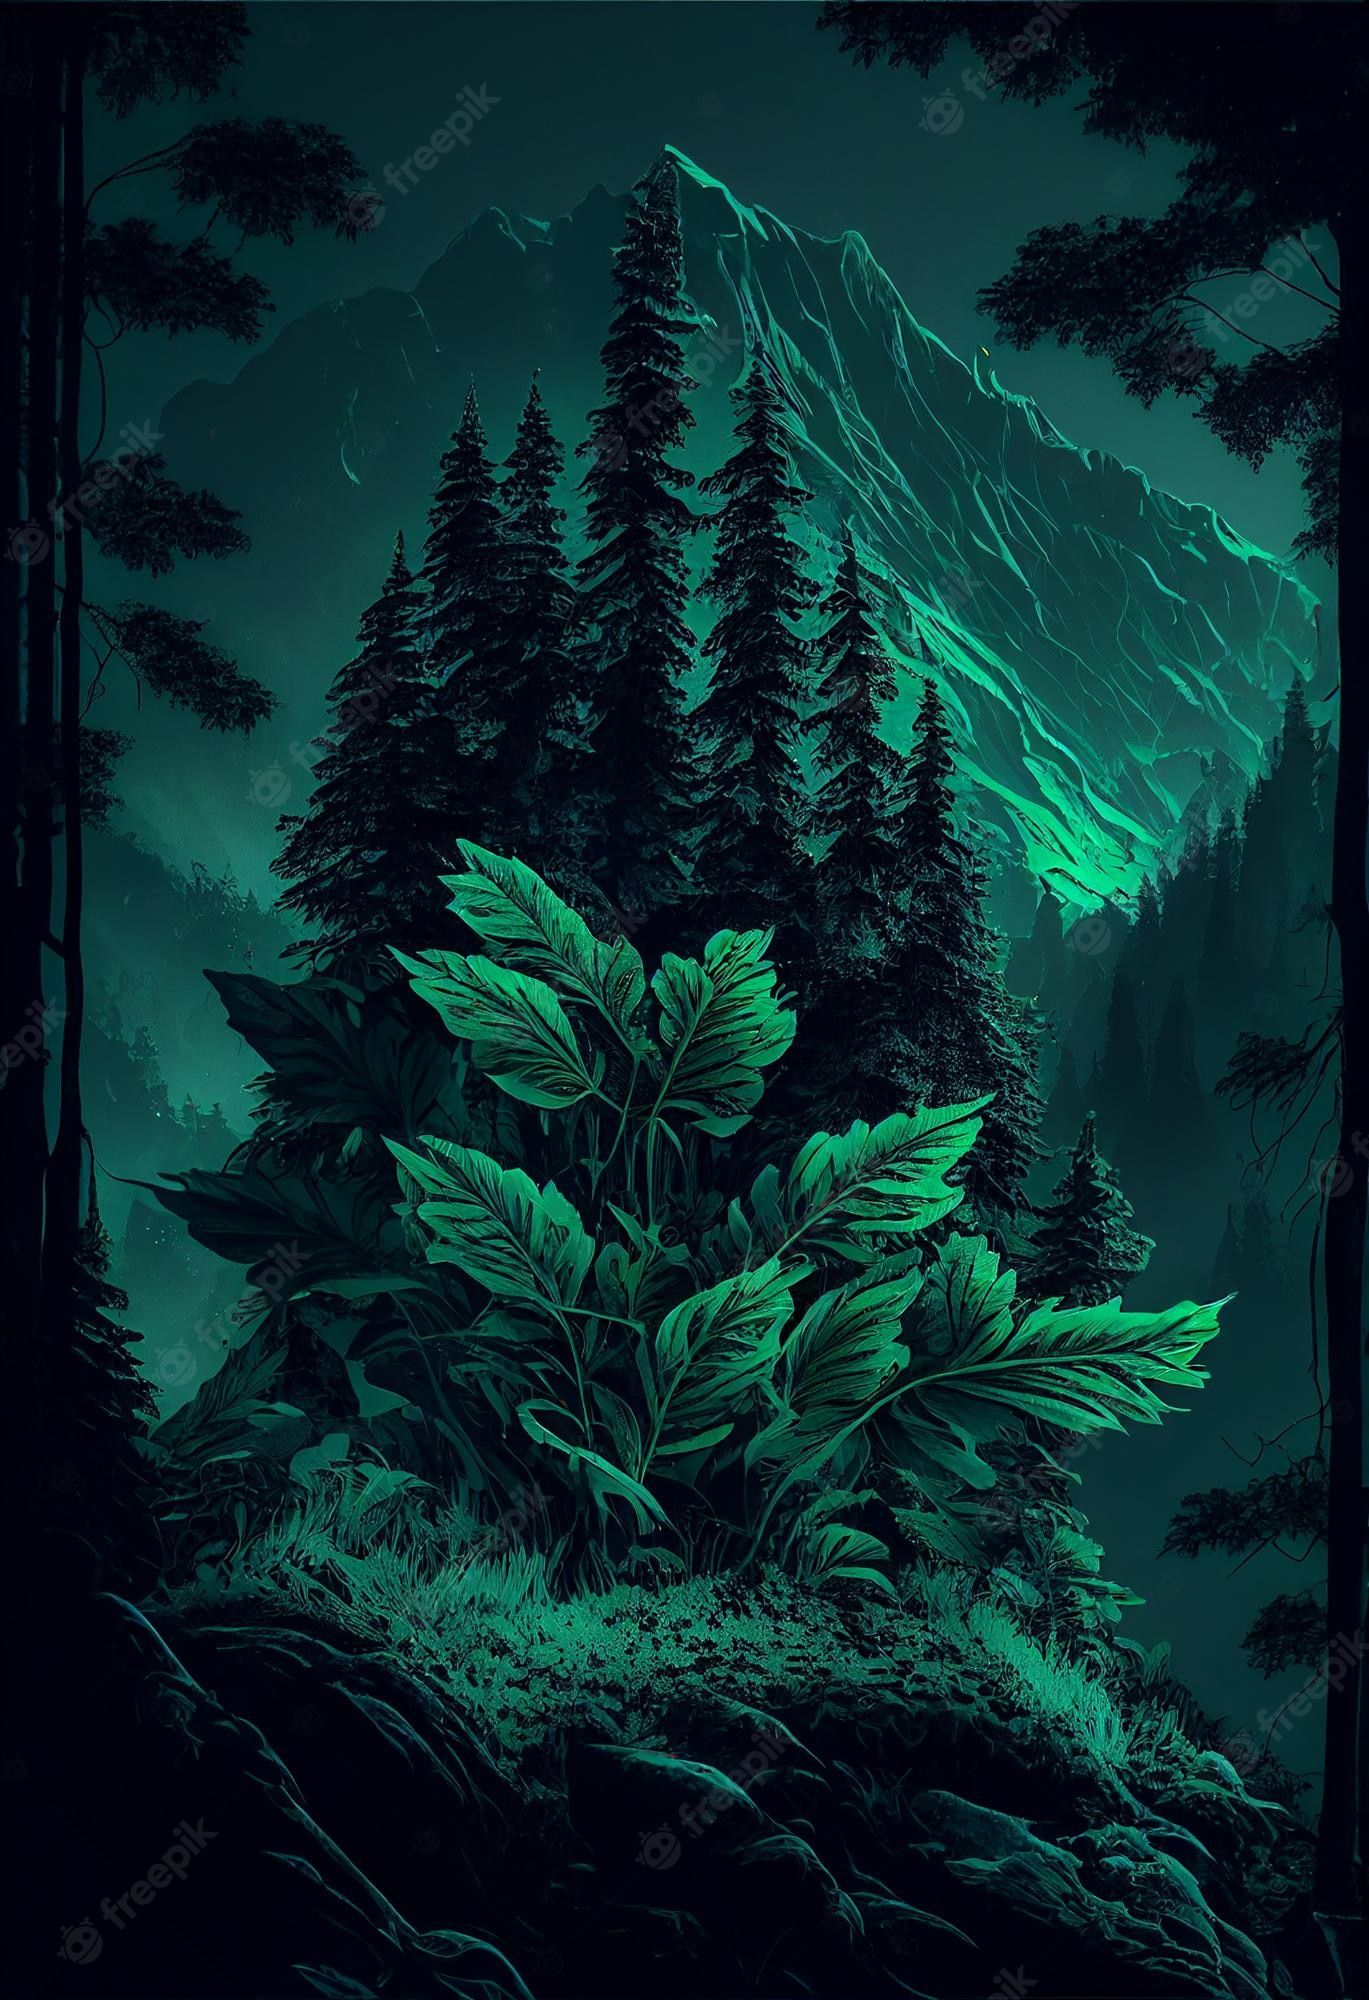 Illustration of a dark forest with trees and mountains - Forest